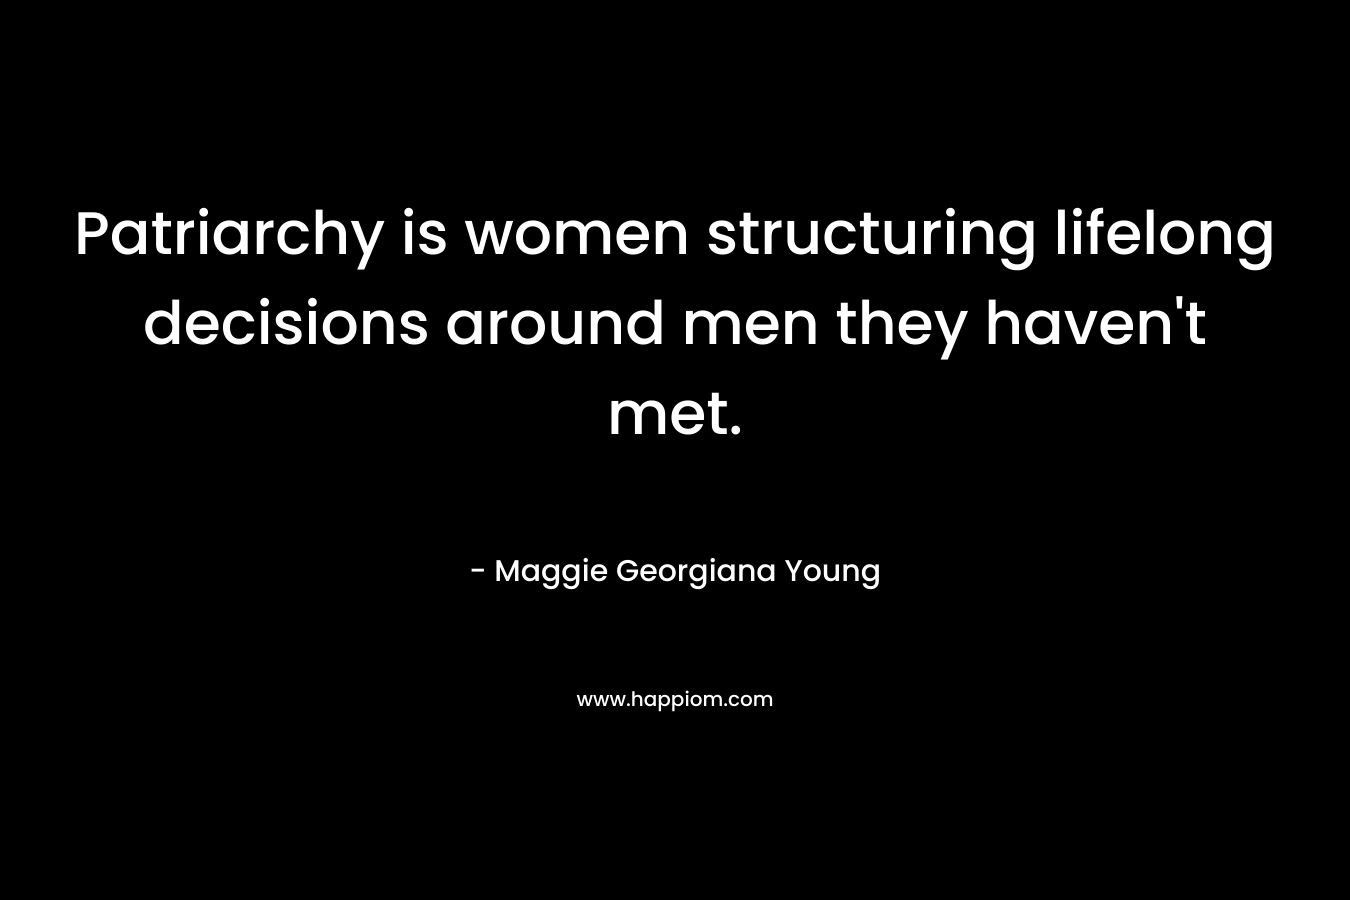 Patriarchy is women structuring lifelong decisions around men they haven’t met. – Maggie Georgiana Young